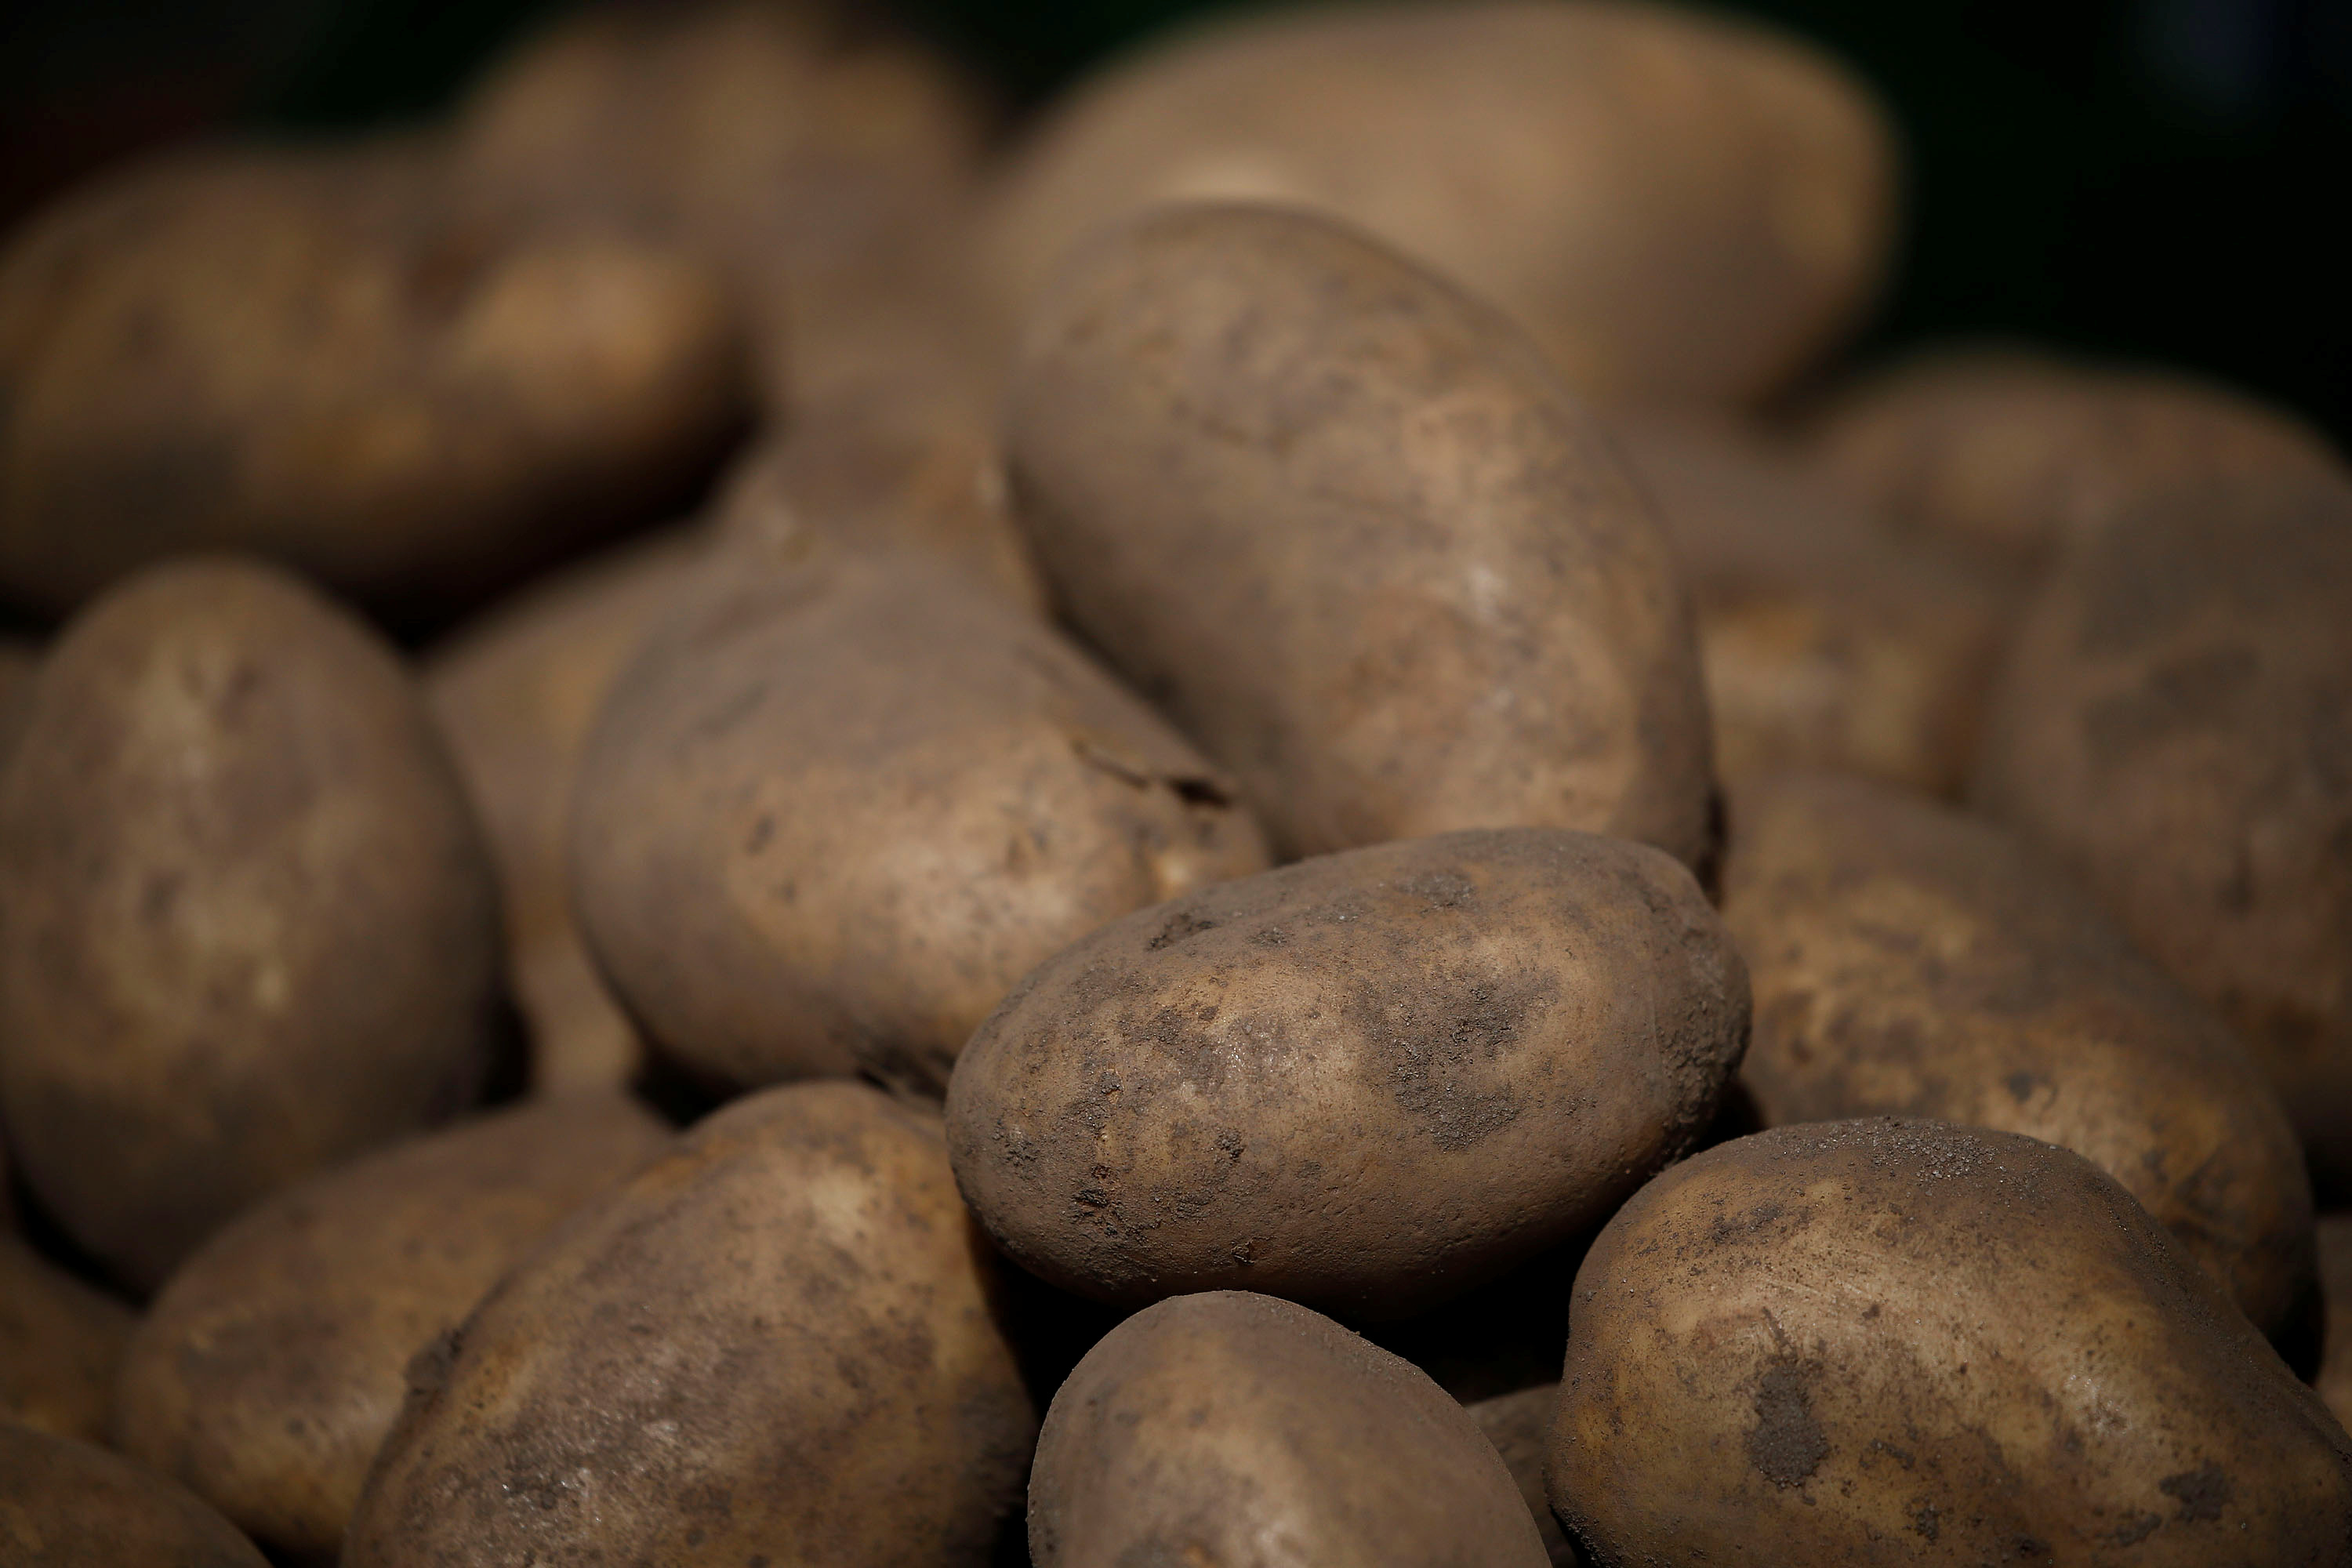 Potatoes are seen for sale on a fruit and vegetable stall at Alsager market, Stoke-on-Trent